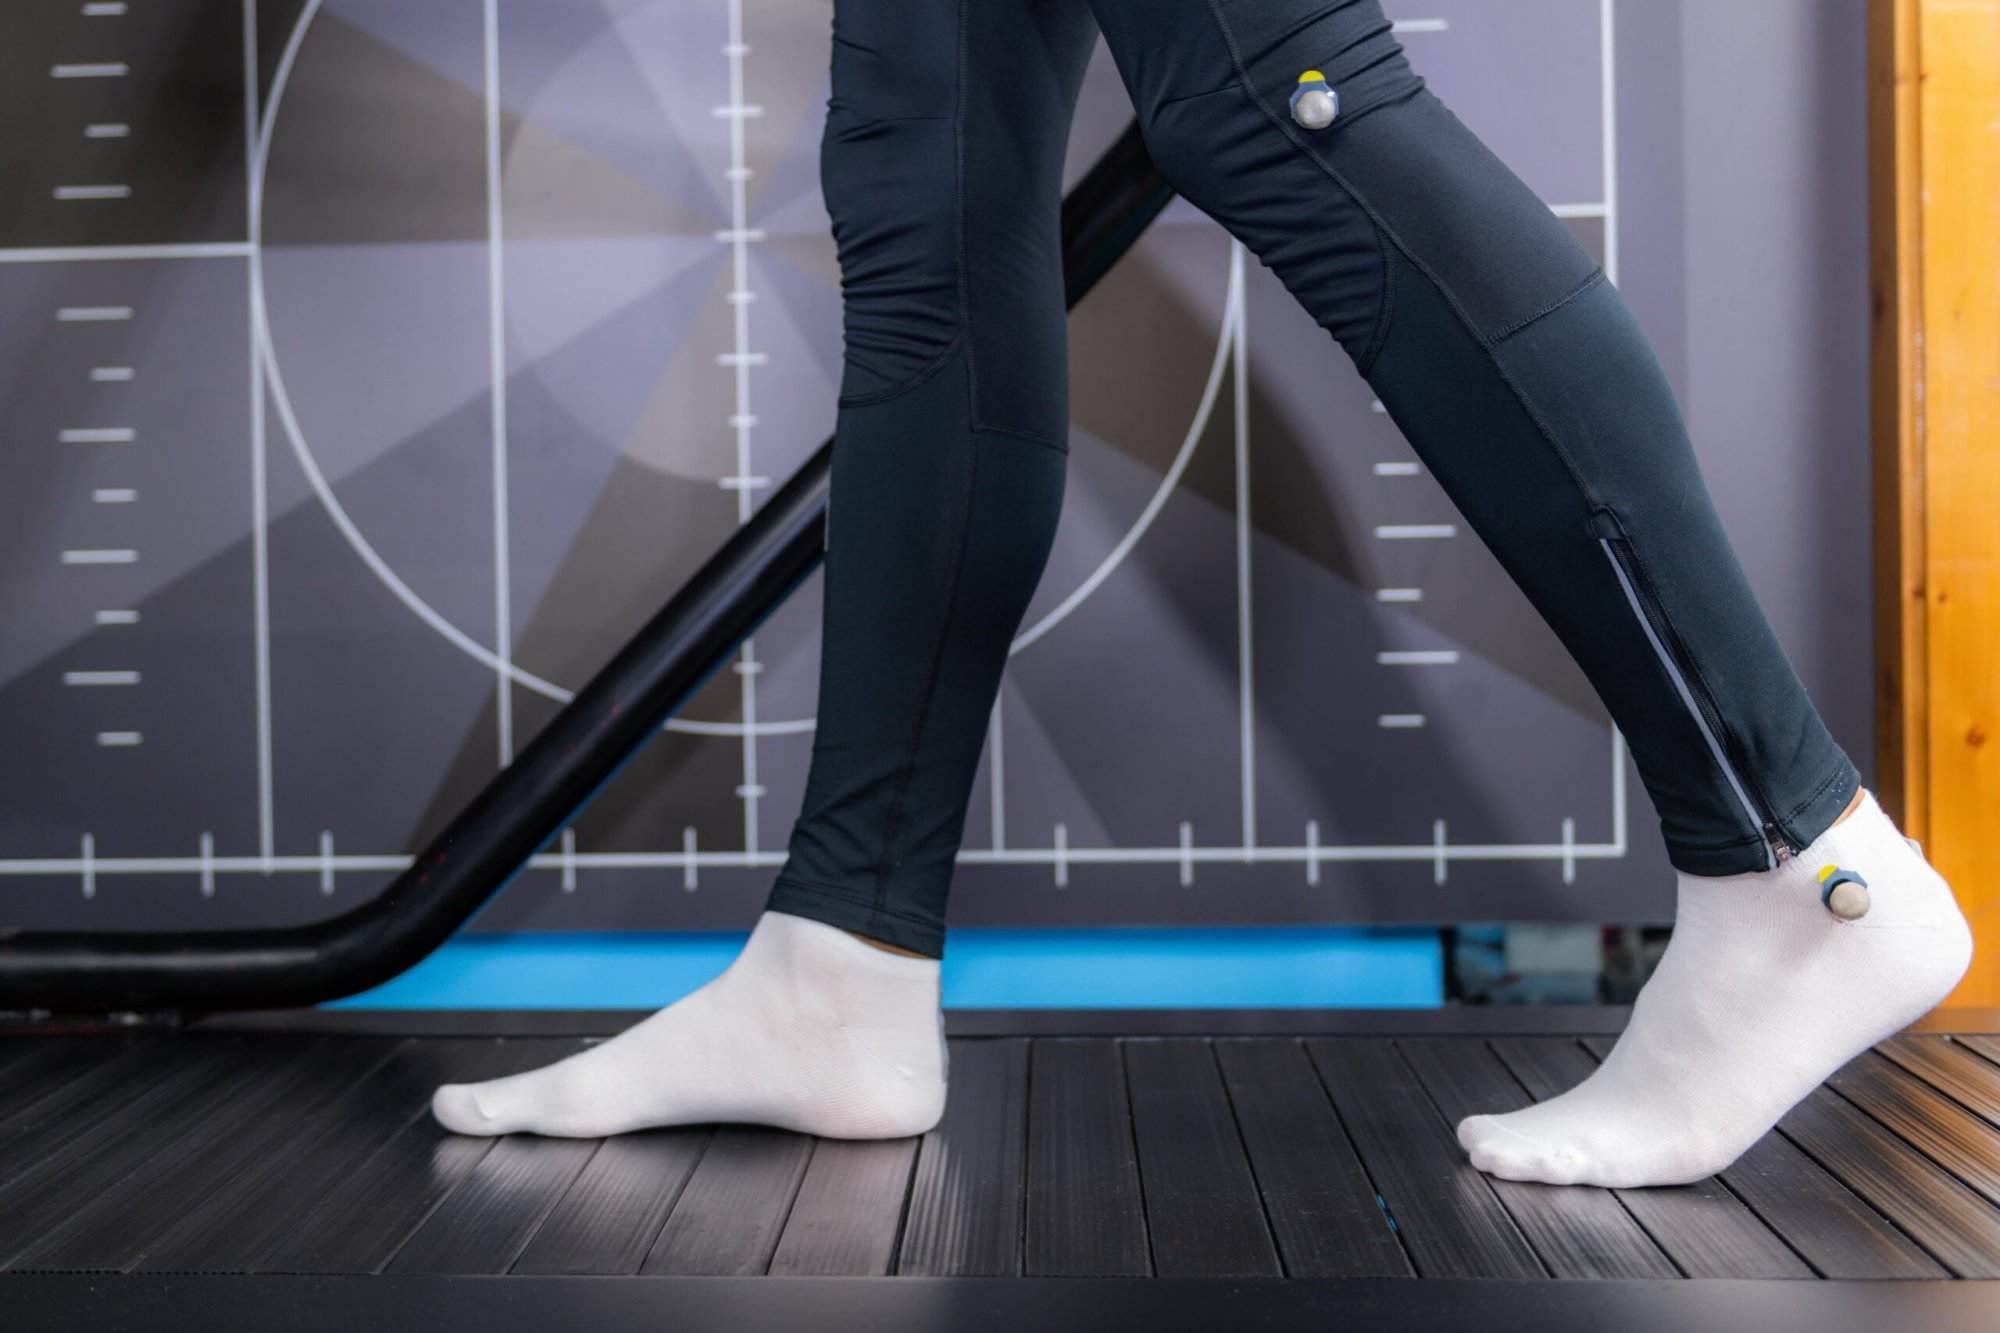 A runner's feet undergoing gait analysis while testing on a treadmill.